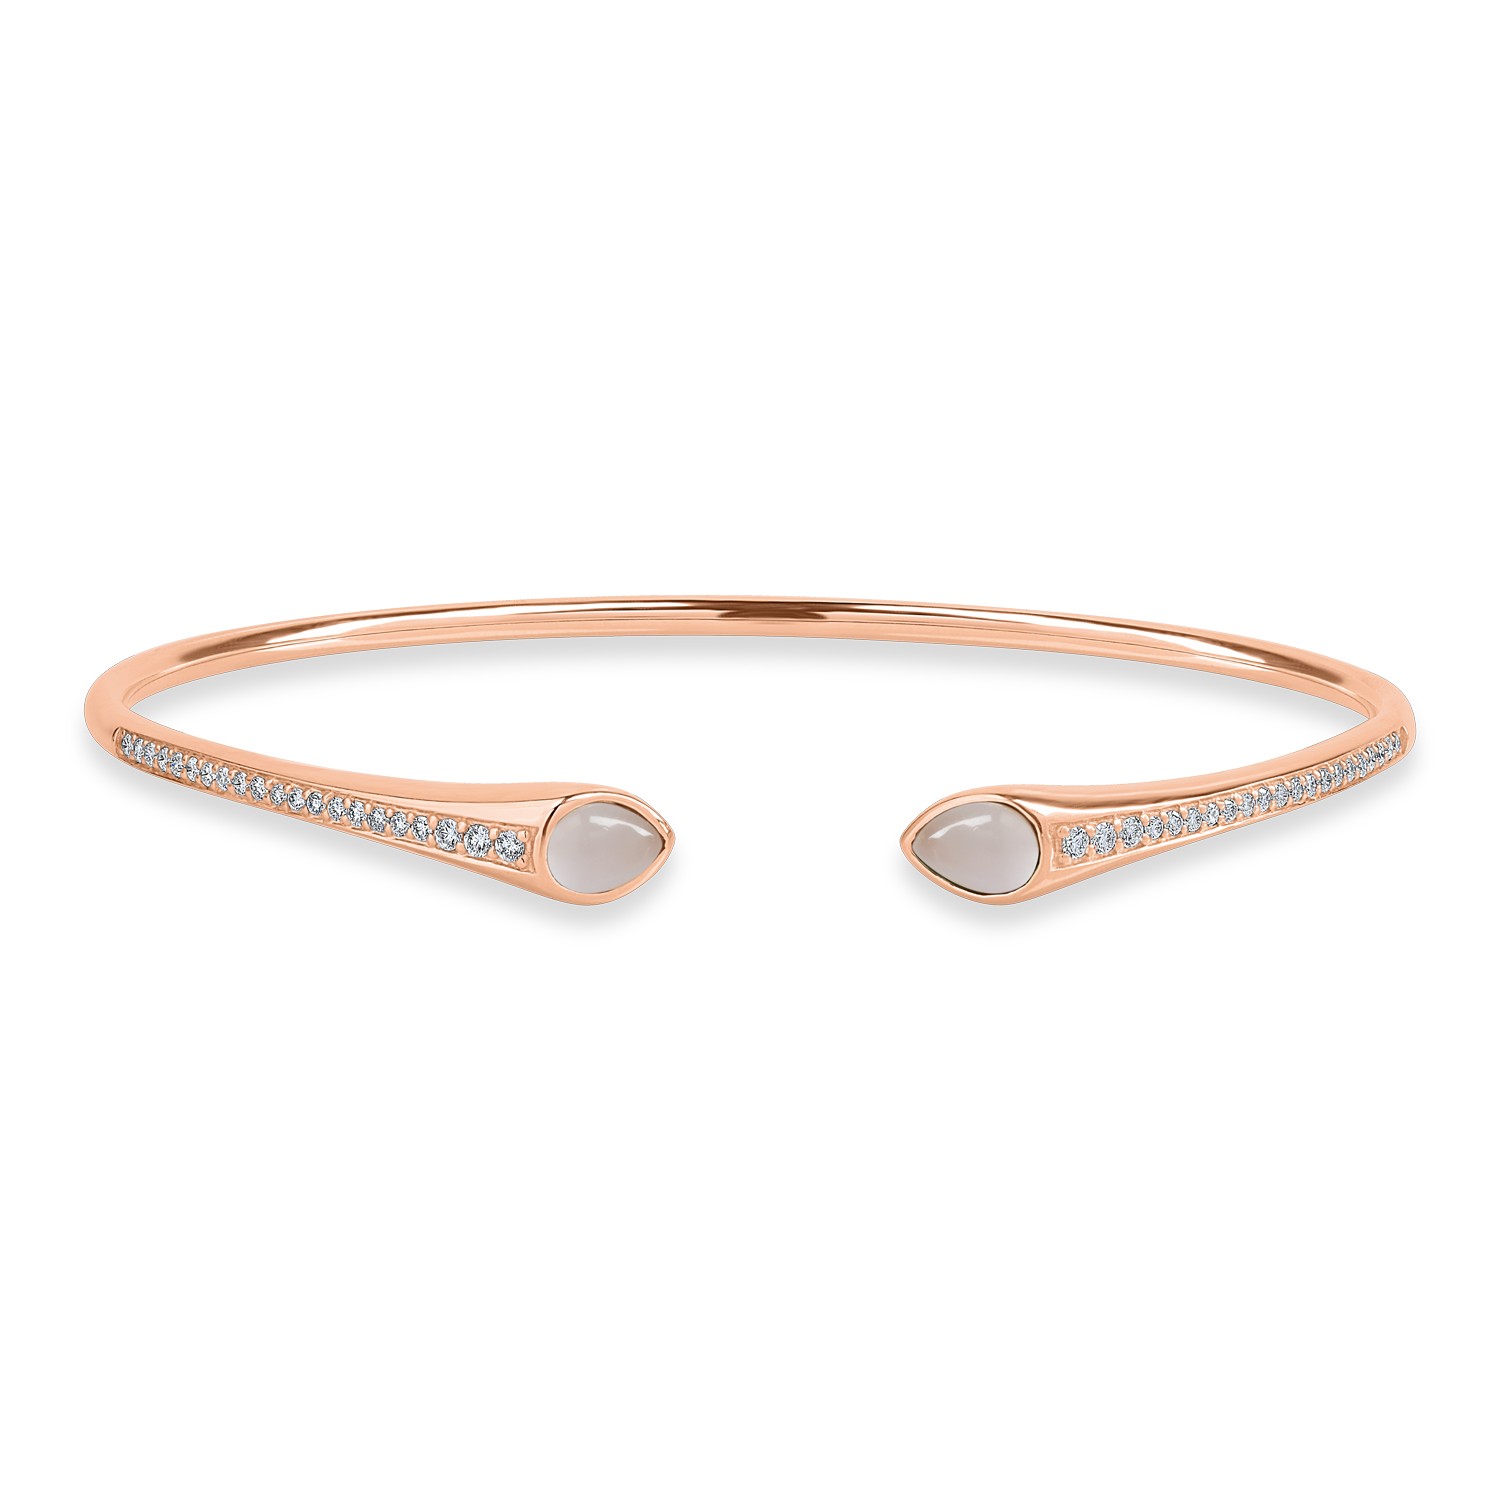 Rose gold bracelet with 1.1ct pink mother of pearl and 0.25ct diamonds